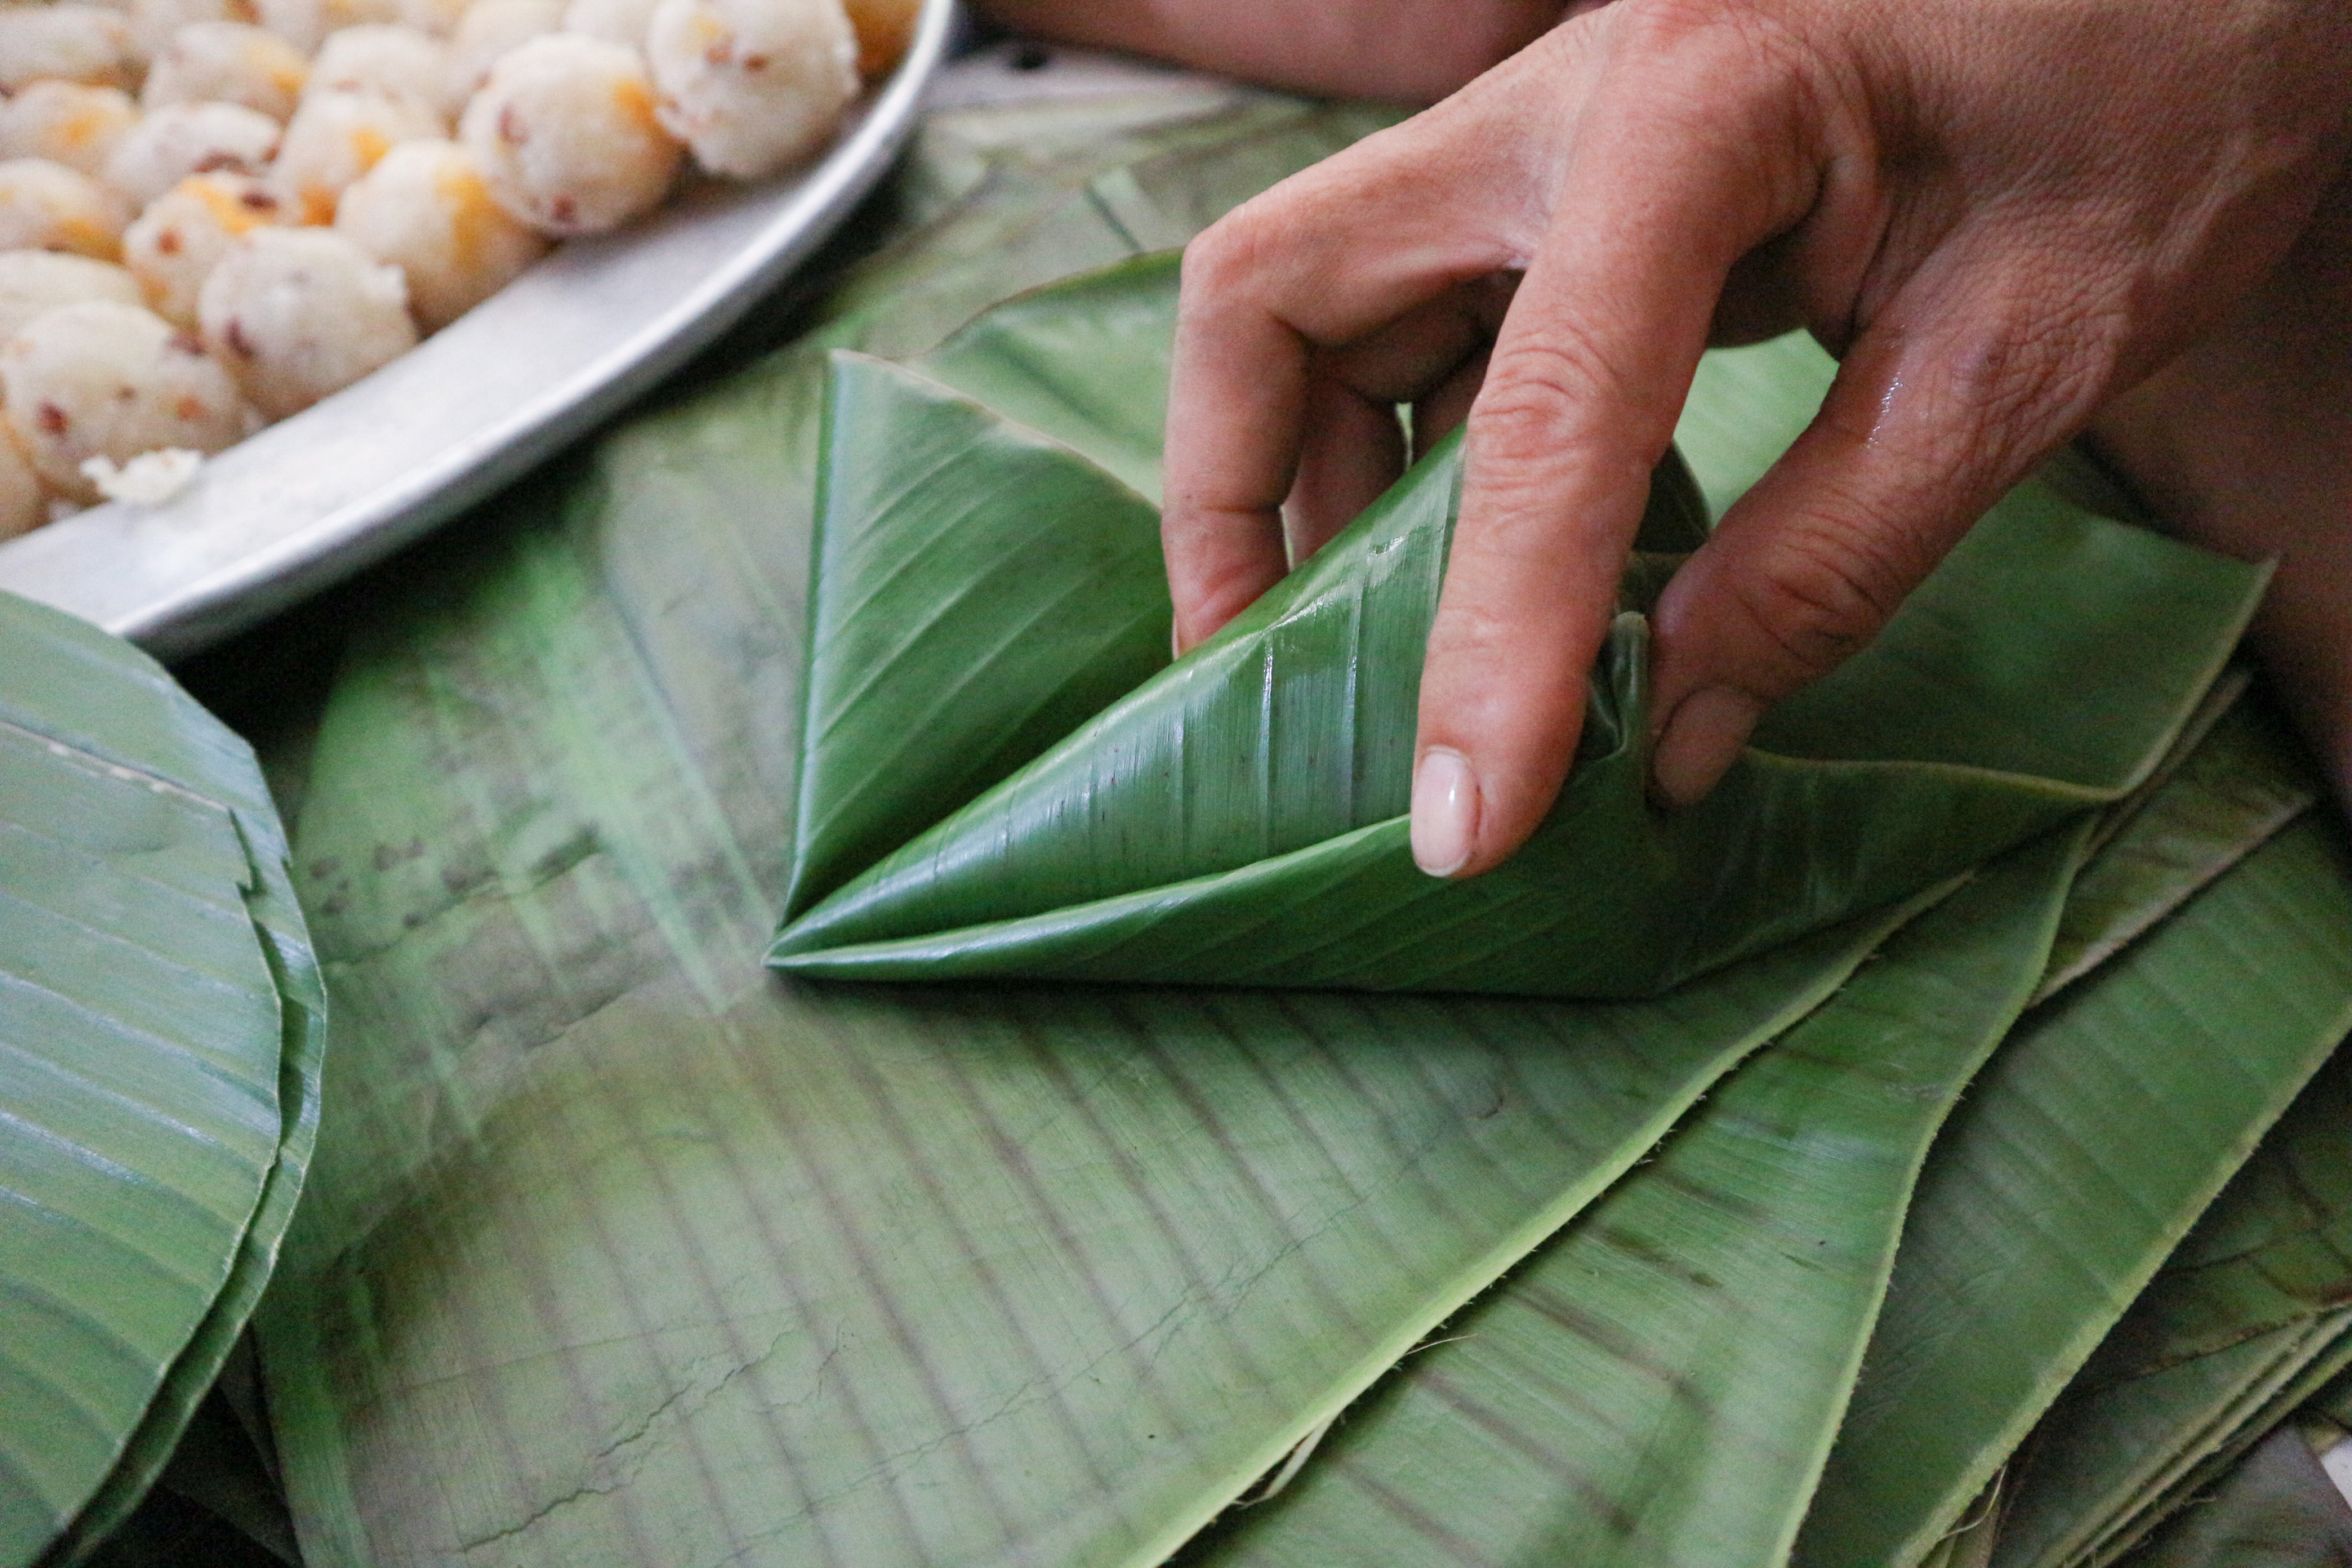 The ‘dough’ is wrapped in two layers of banana leaves and formed into a pyramid. Photo: Ngoc Phuong / Tuoi Tre News